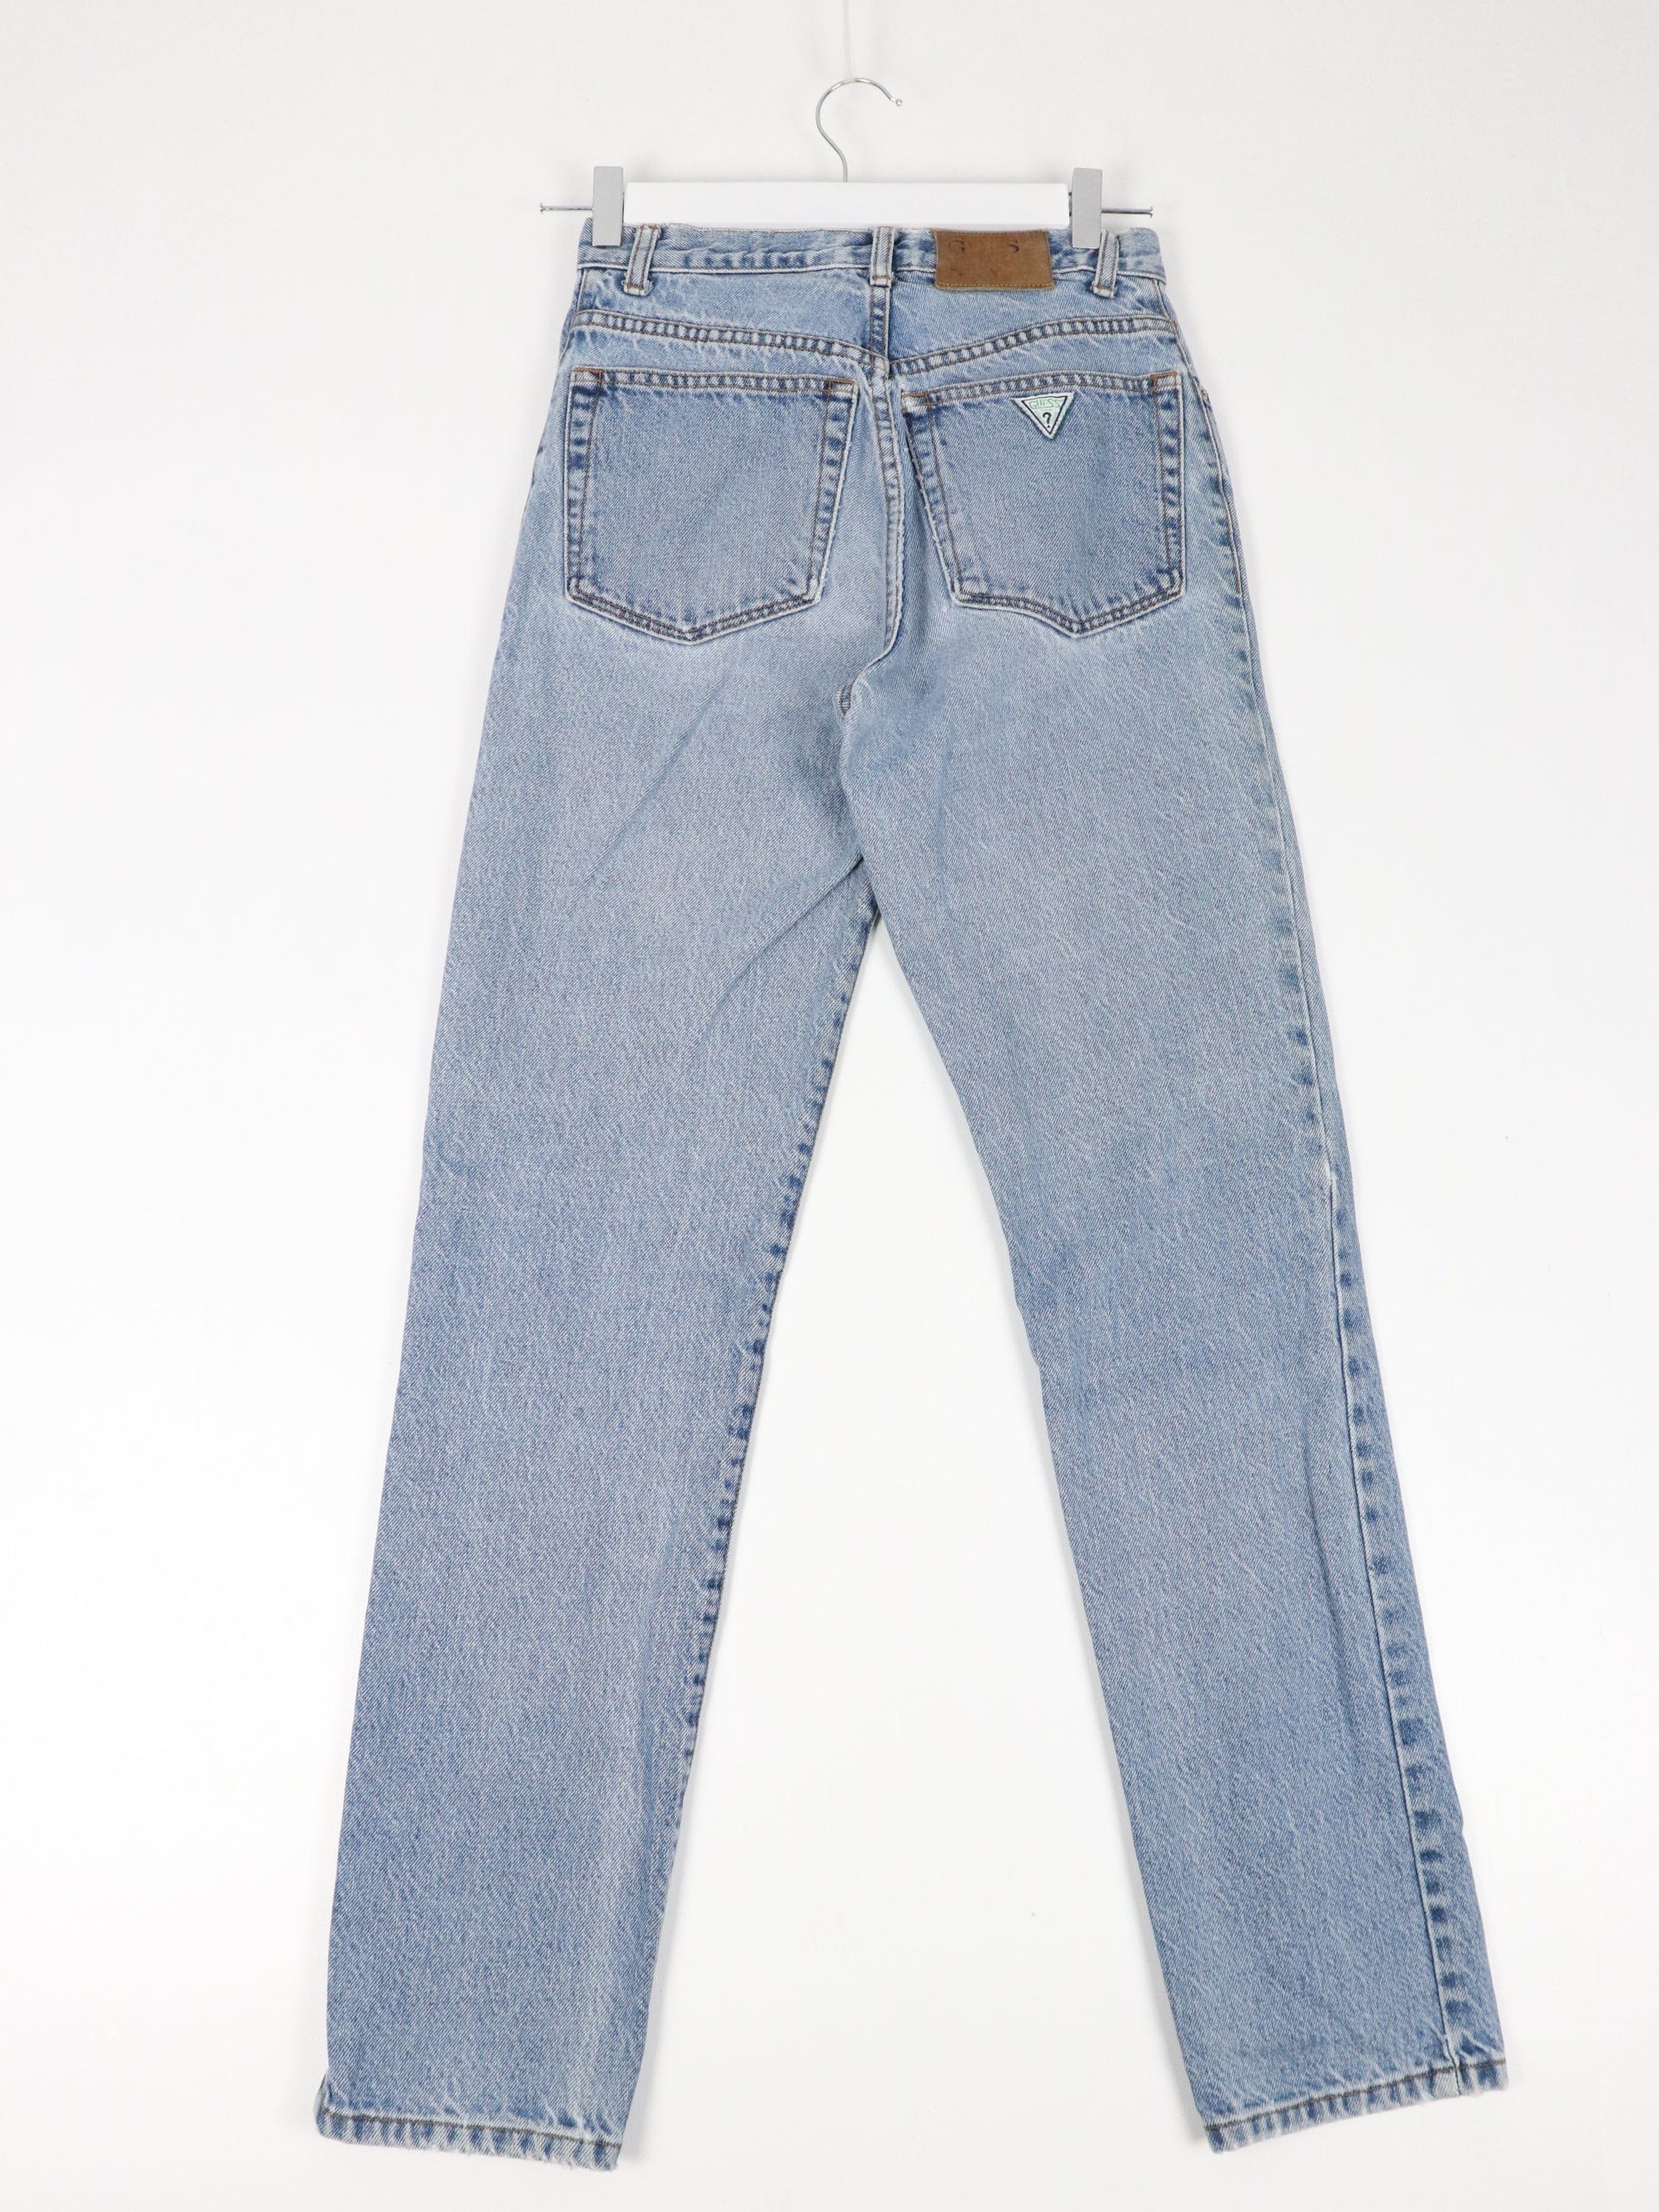 Vintage 1990's Guess Jeans Made In USA Slim Fit Denim Jeans